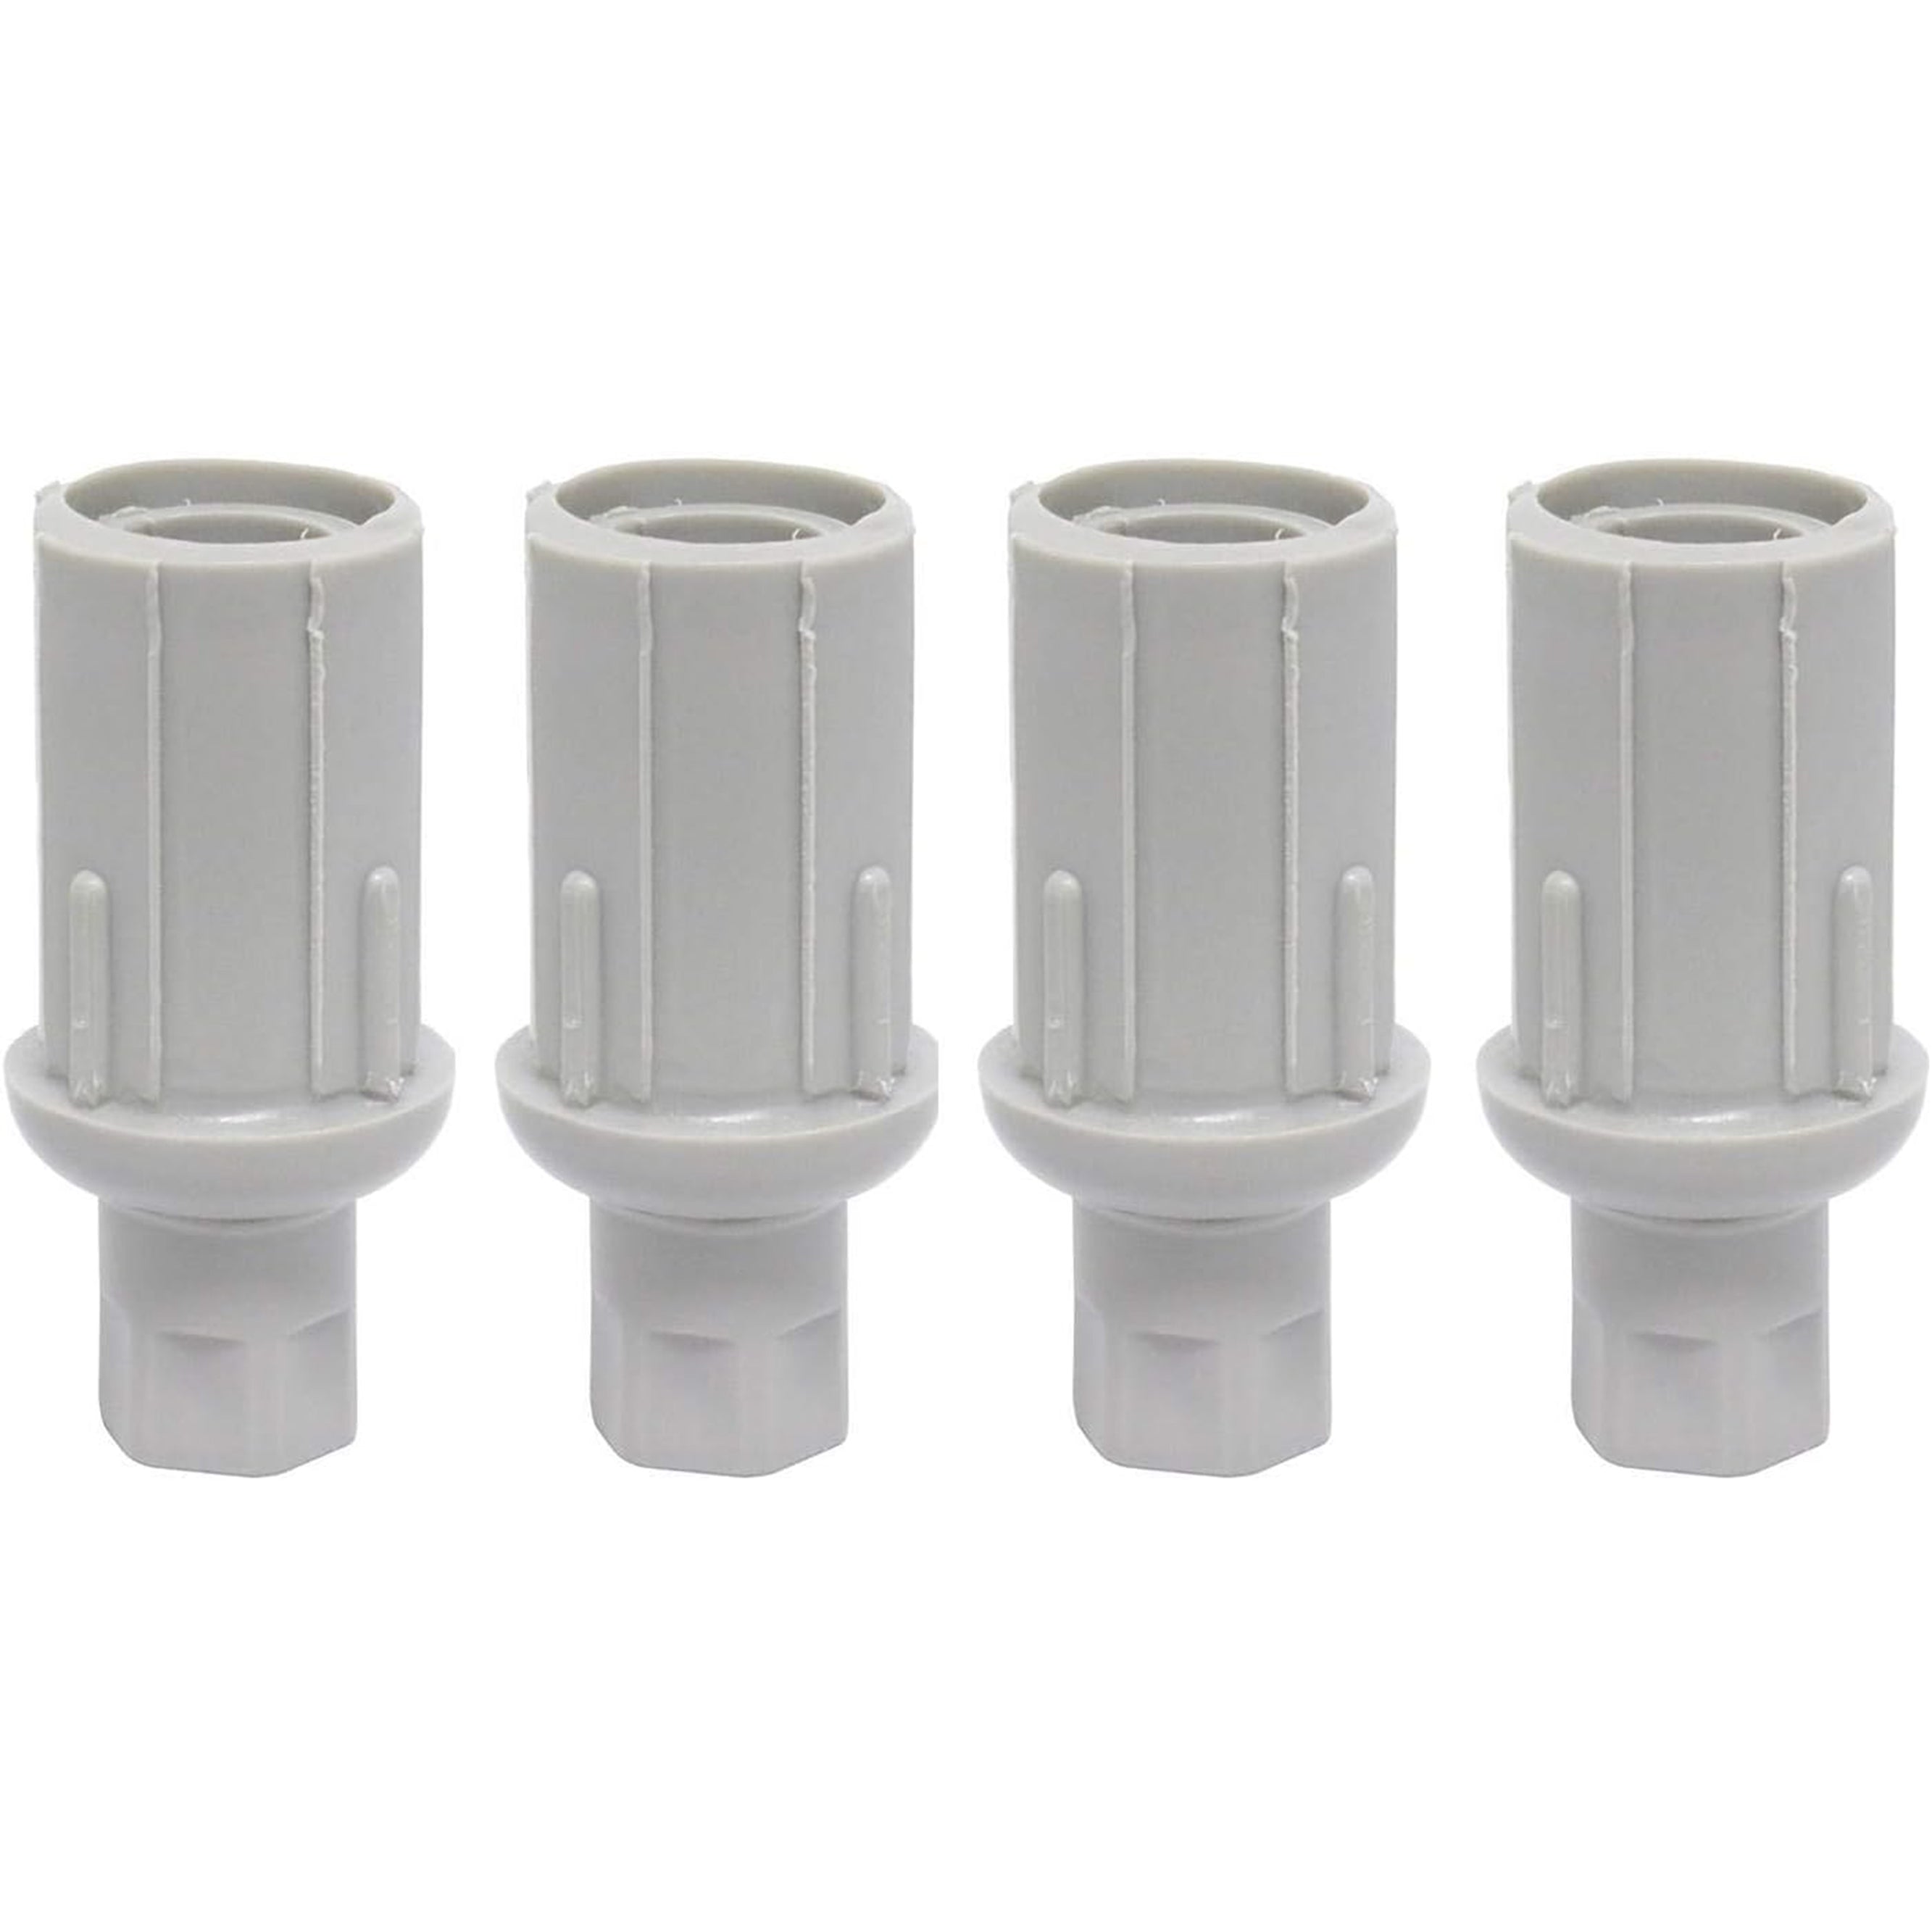 Leyso Set of 4 Adjustable Height Plastic Bullet Feet for Stainless Steel 1-5/8" O.D Tubing, FT-P3